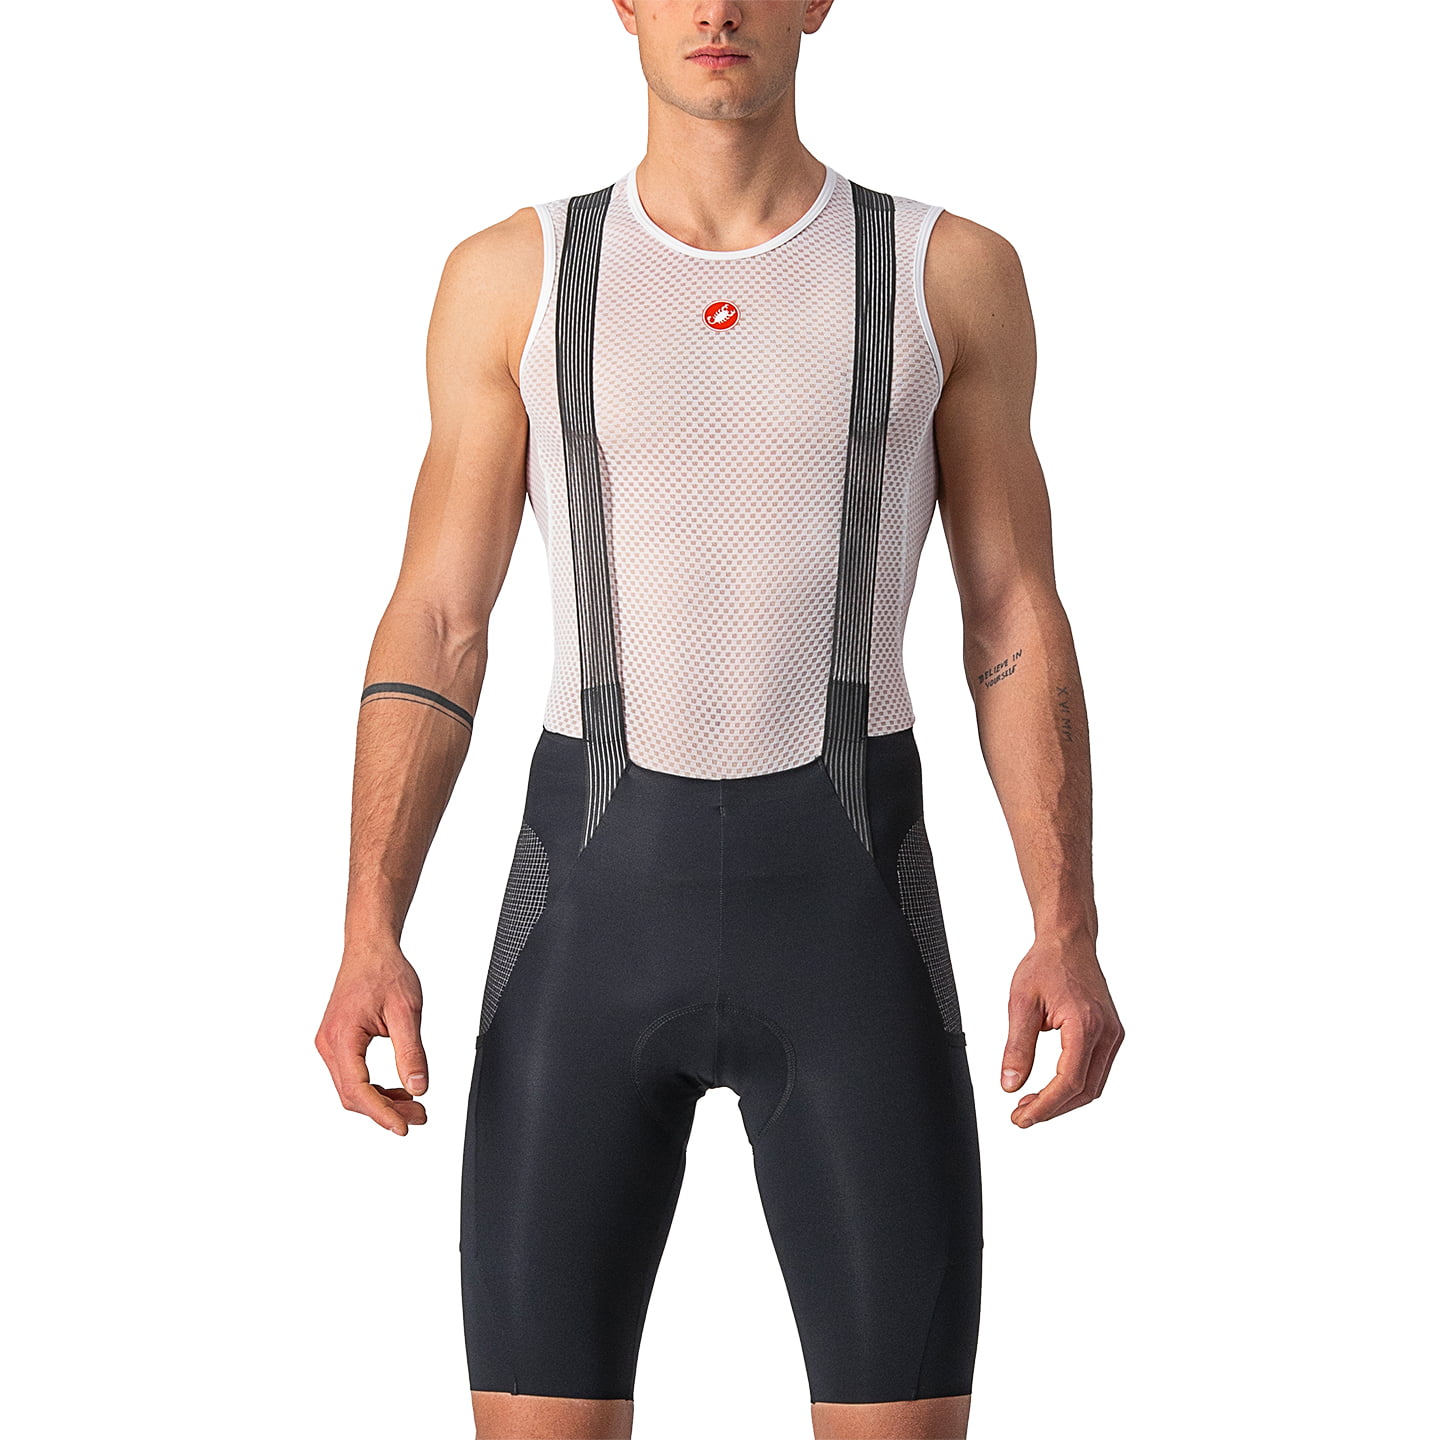 Free Unlimited Bib Shorts Bib Shorts, for men, size S, Cycle trousers, Cycle clothing